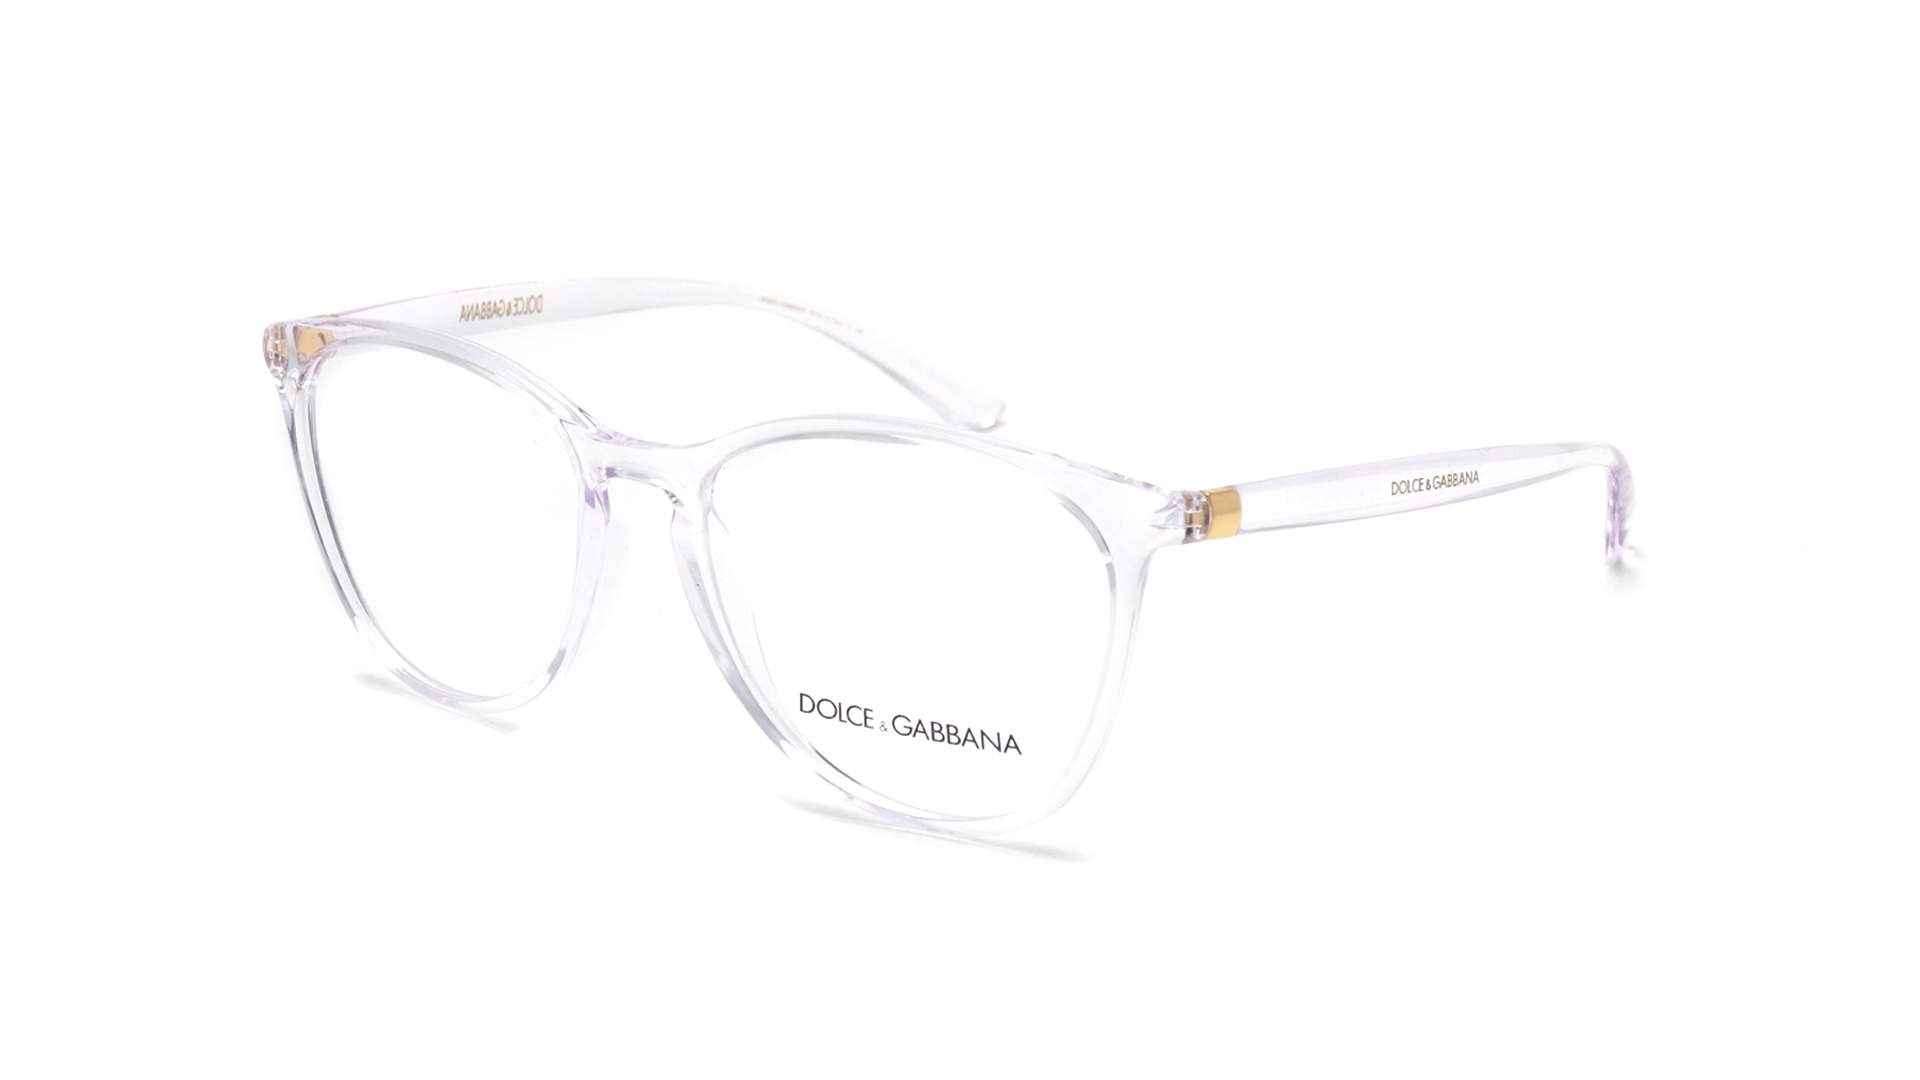 dolce and gabbana spectacles